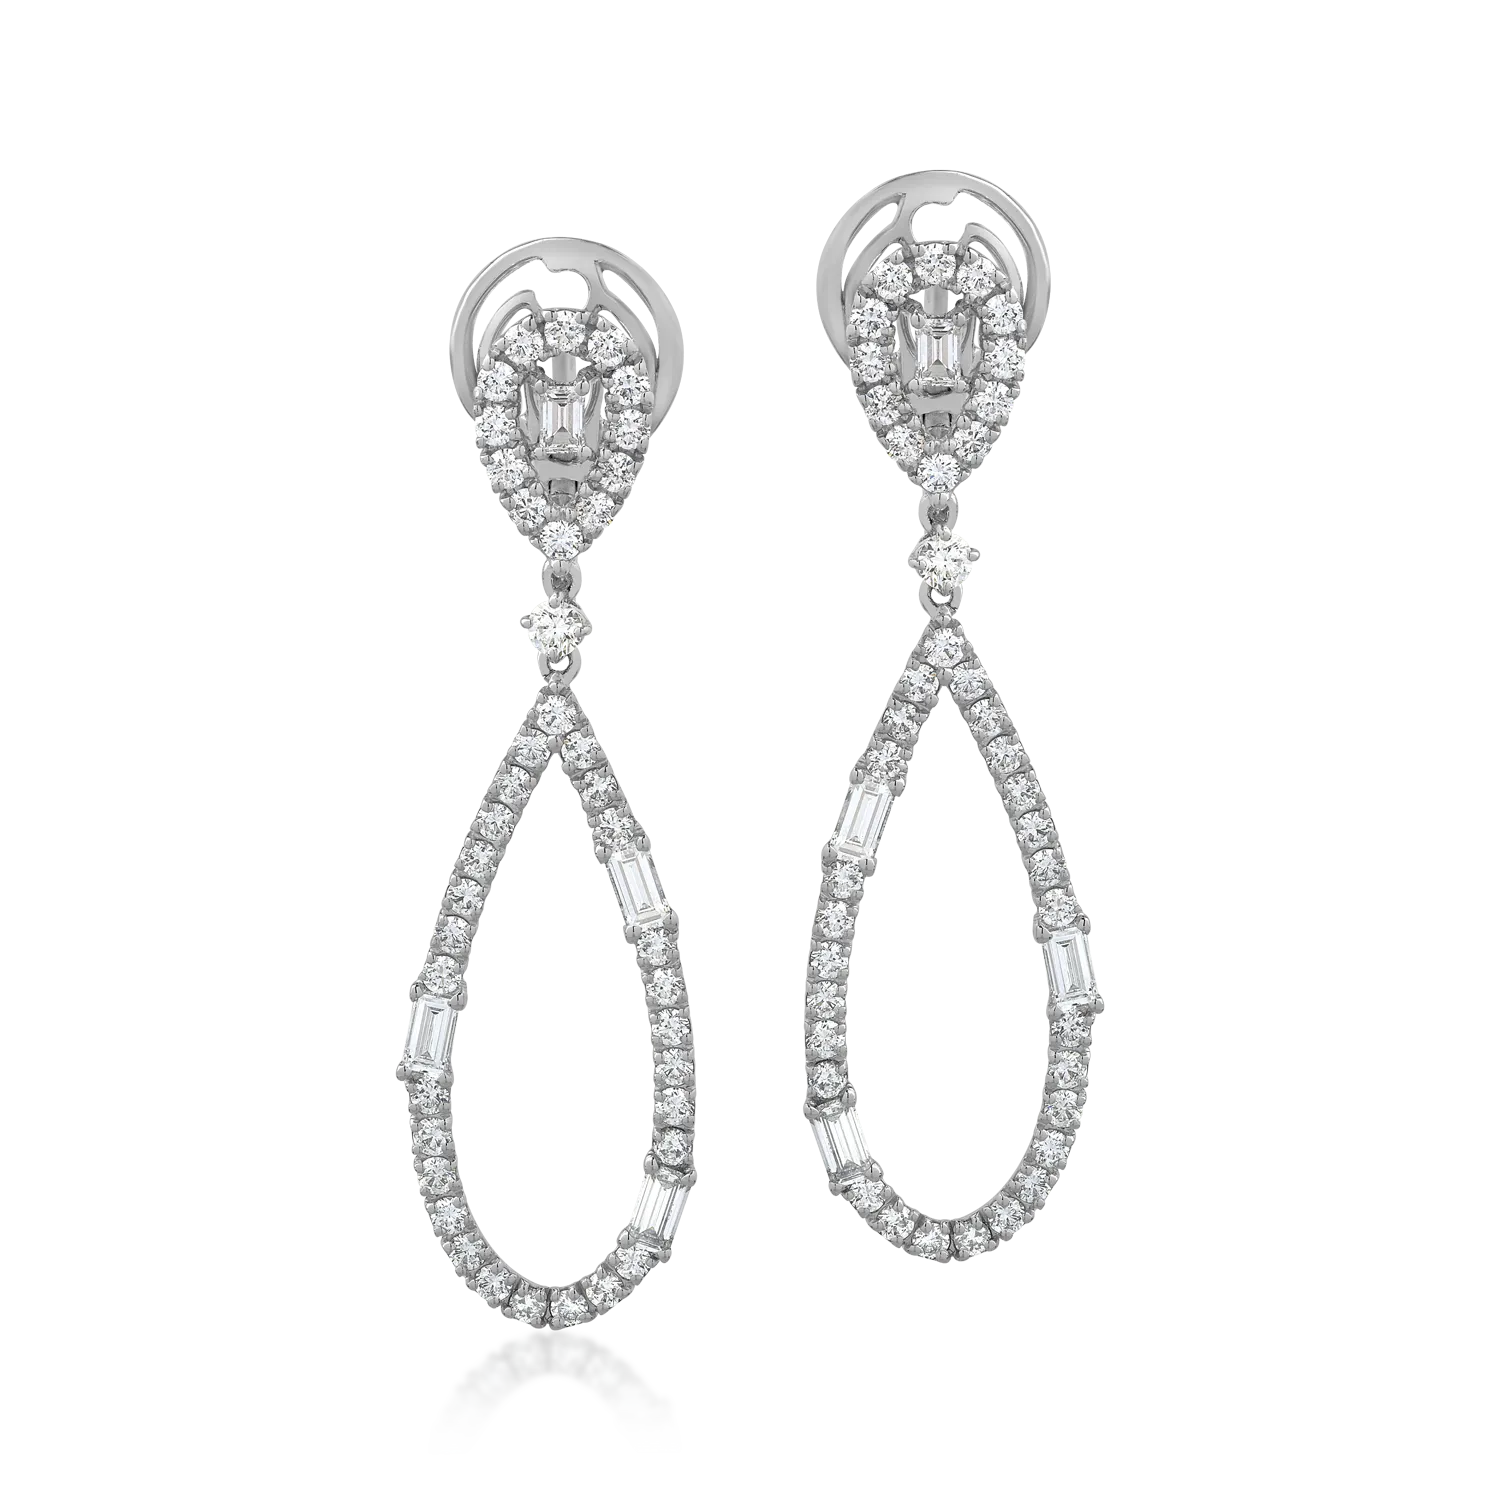 18K white gold earrings with 2.64ct diamonds